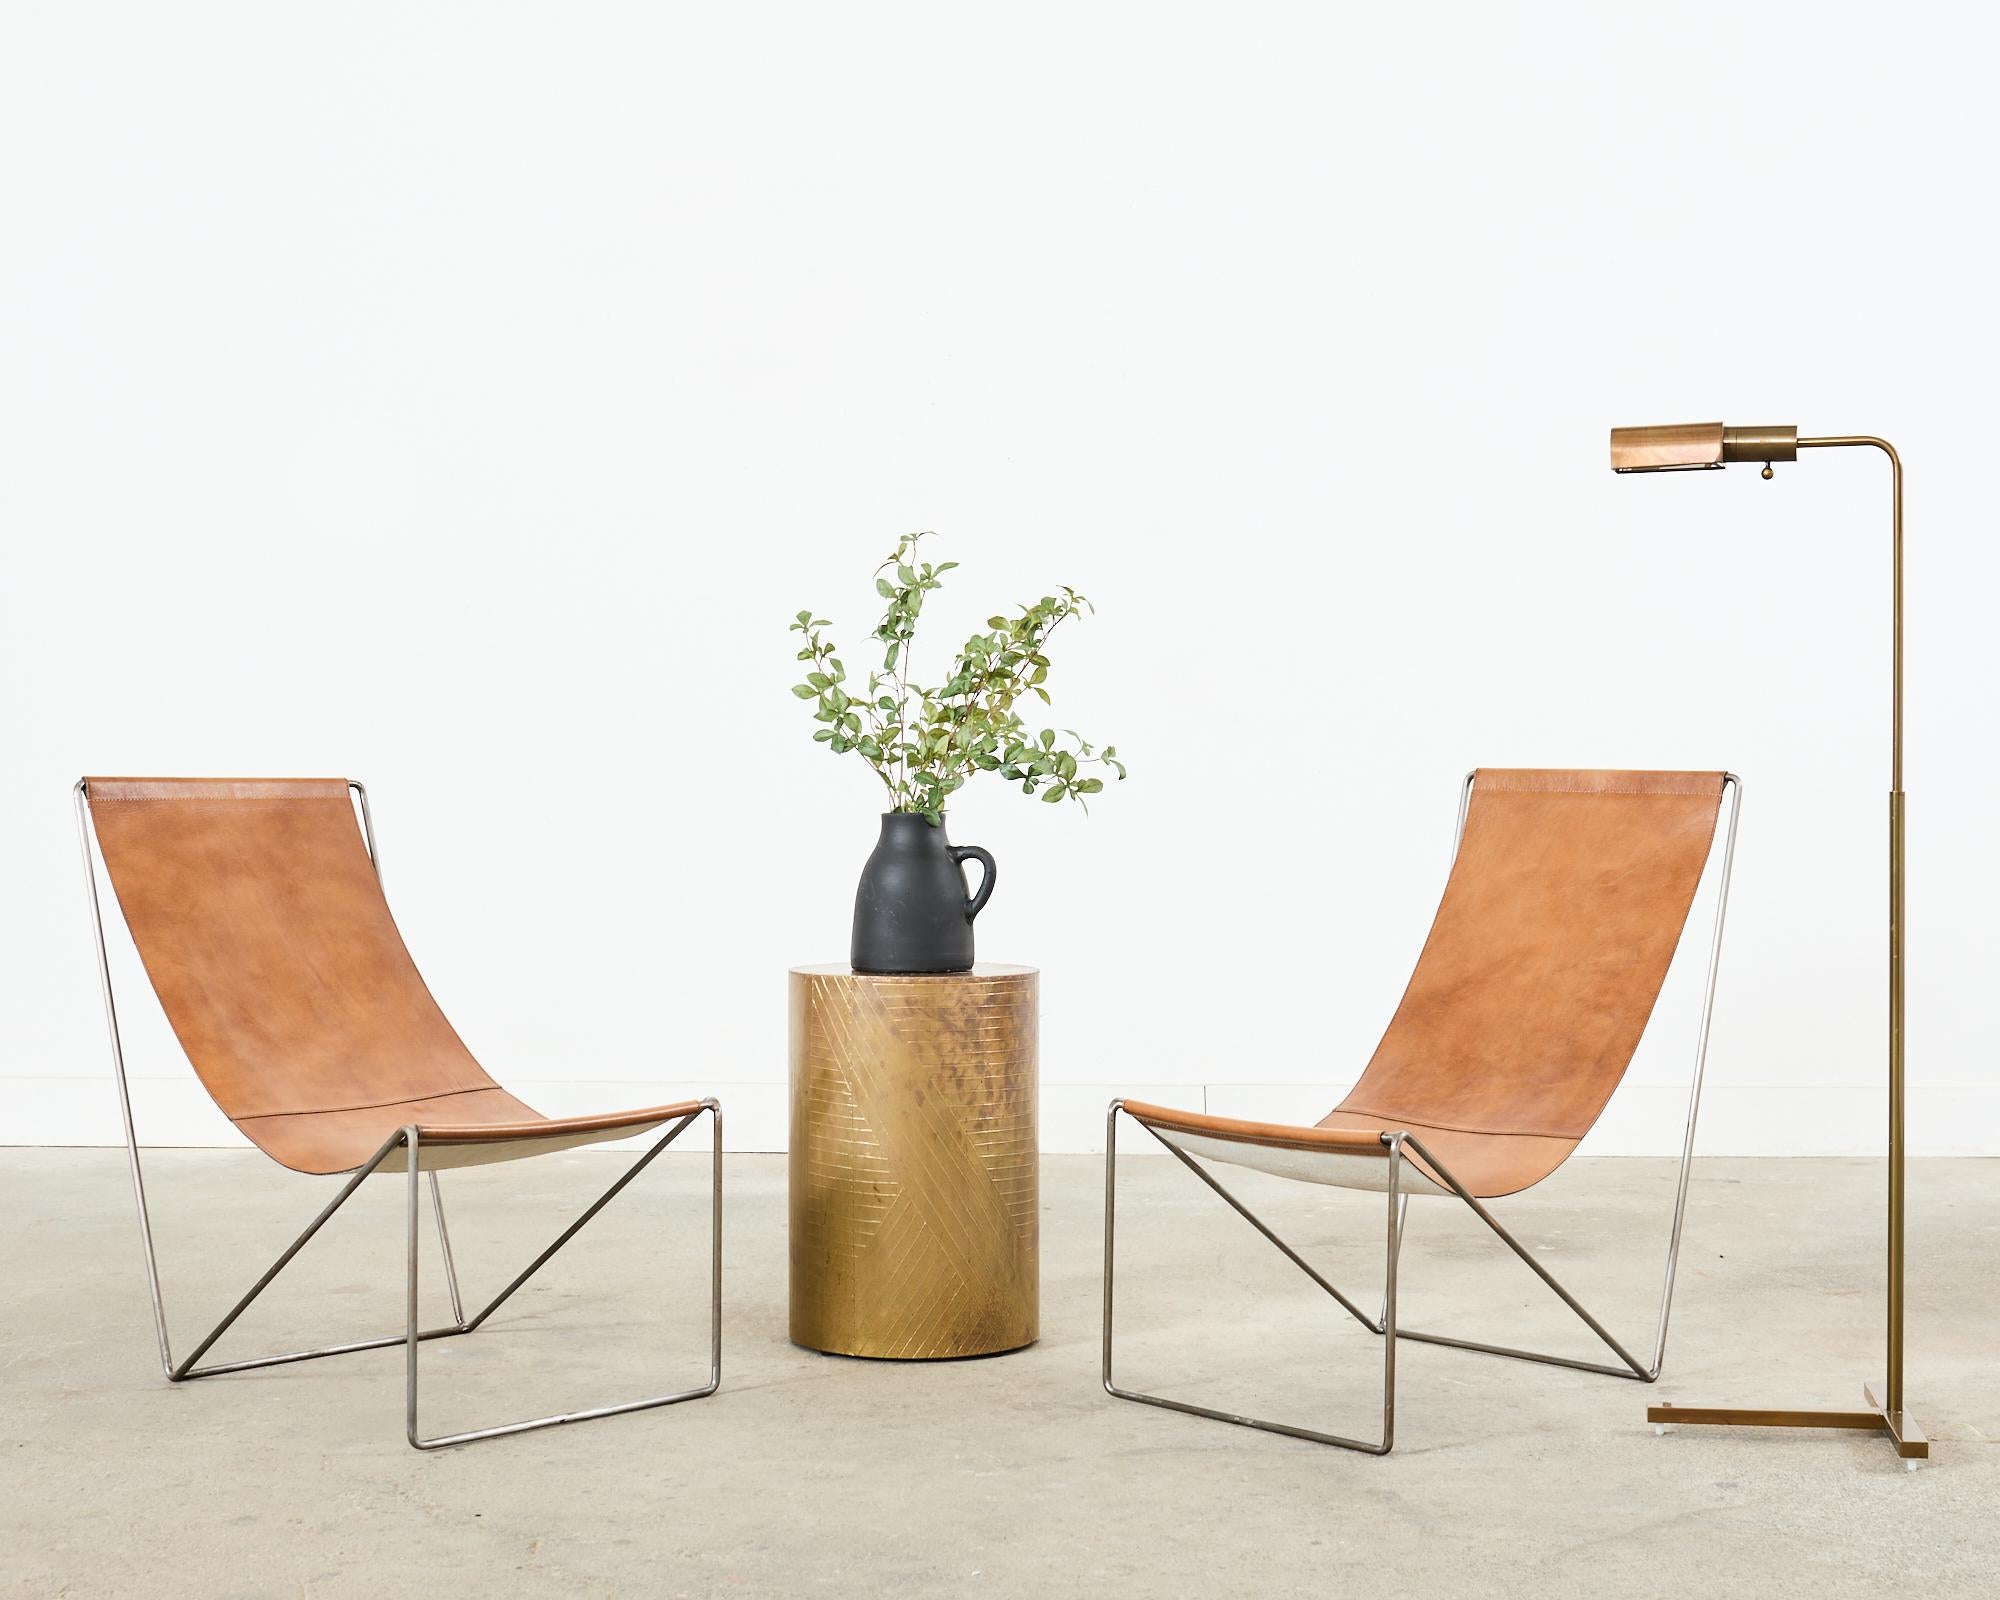 Amazing minimalist design leather sling lounge chairs made in the mid-century Danish modern style and manner of Verner Panton (Danish Designer 1926-1998). Verner's chair design was the inspiration for many later styles such as Michael Verheyden's